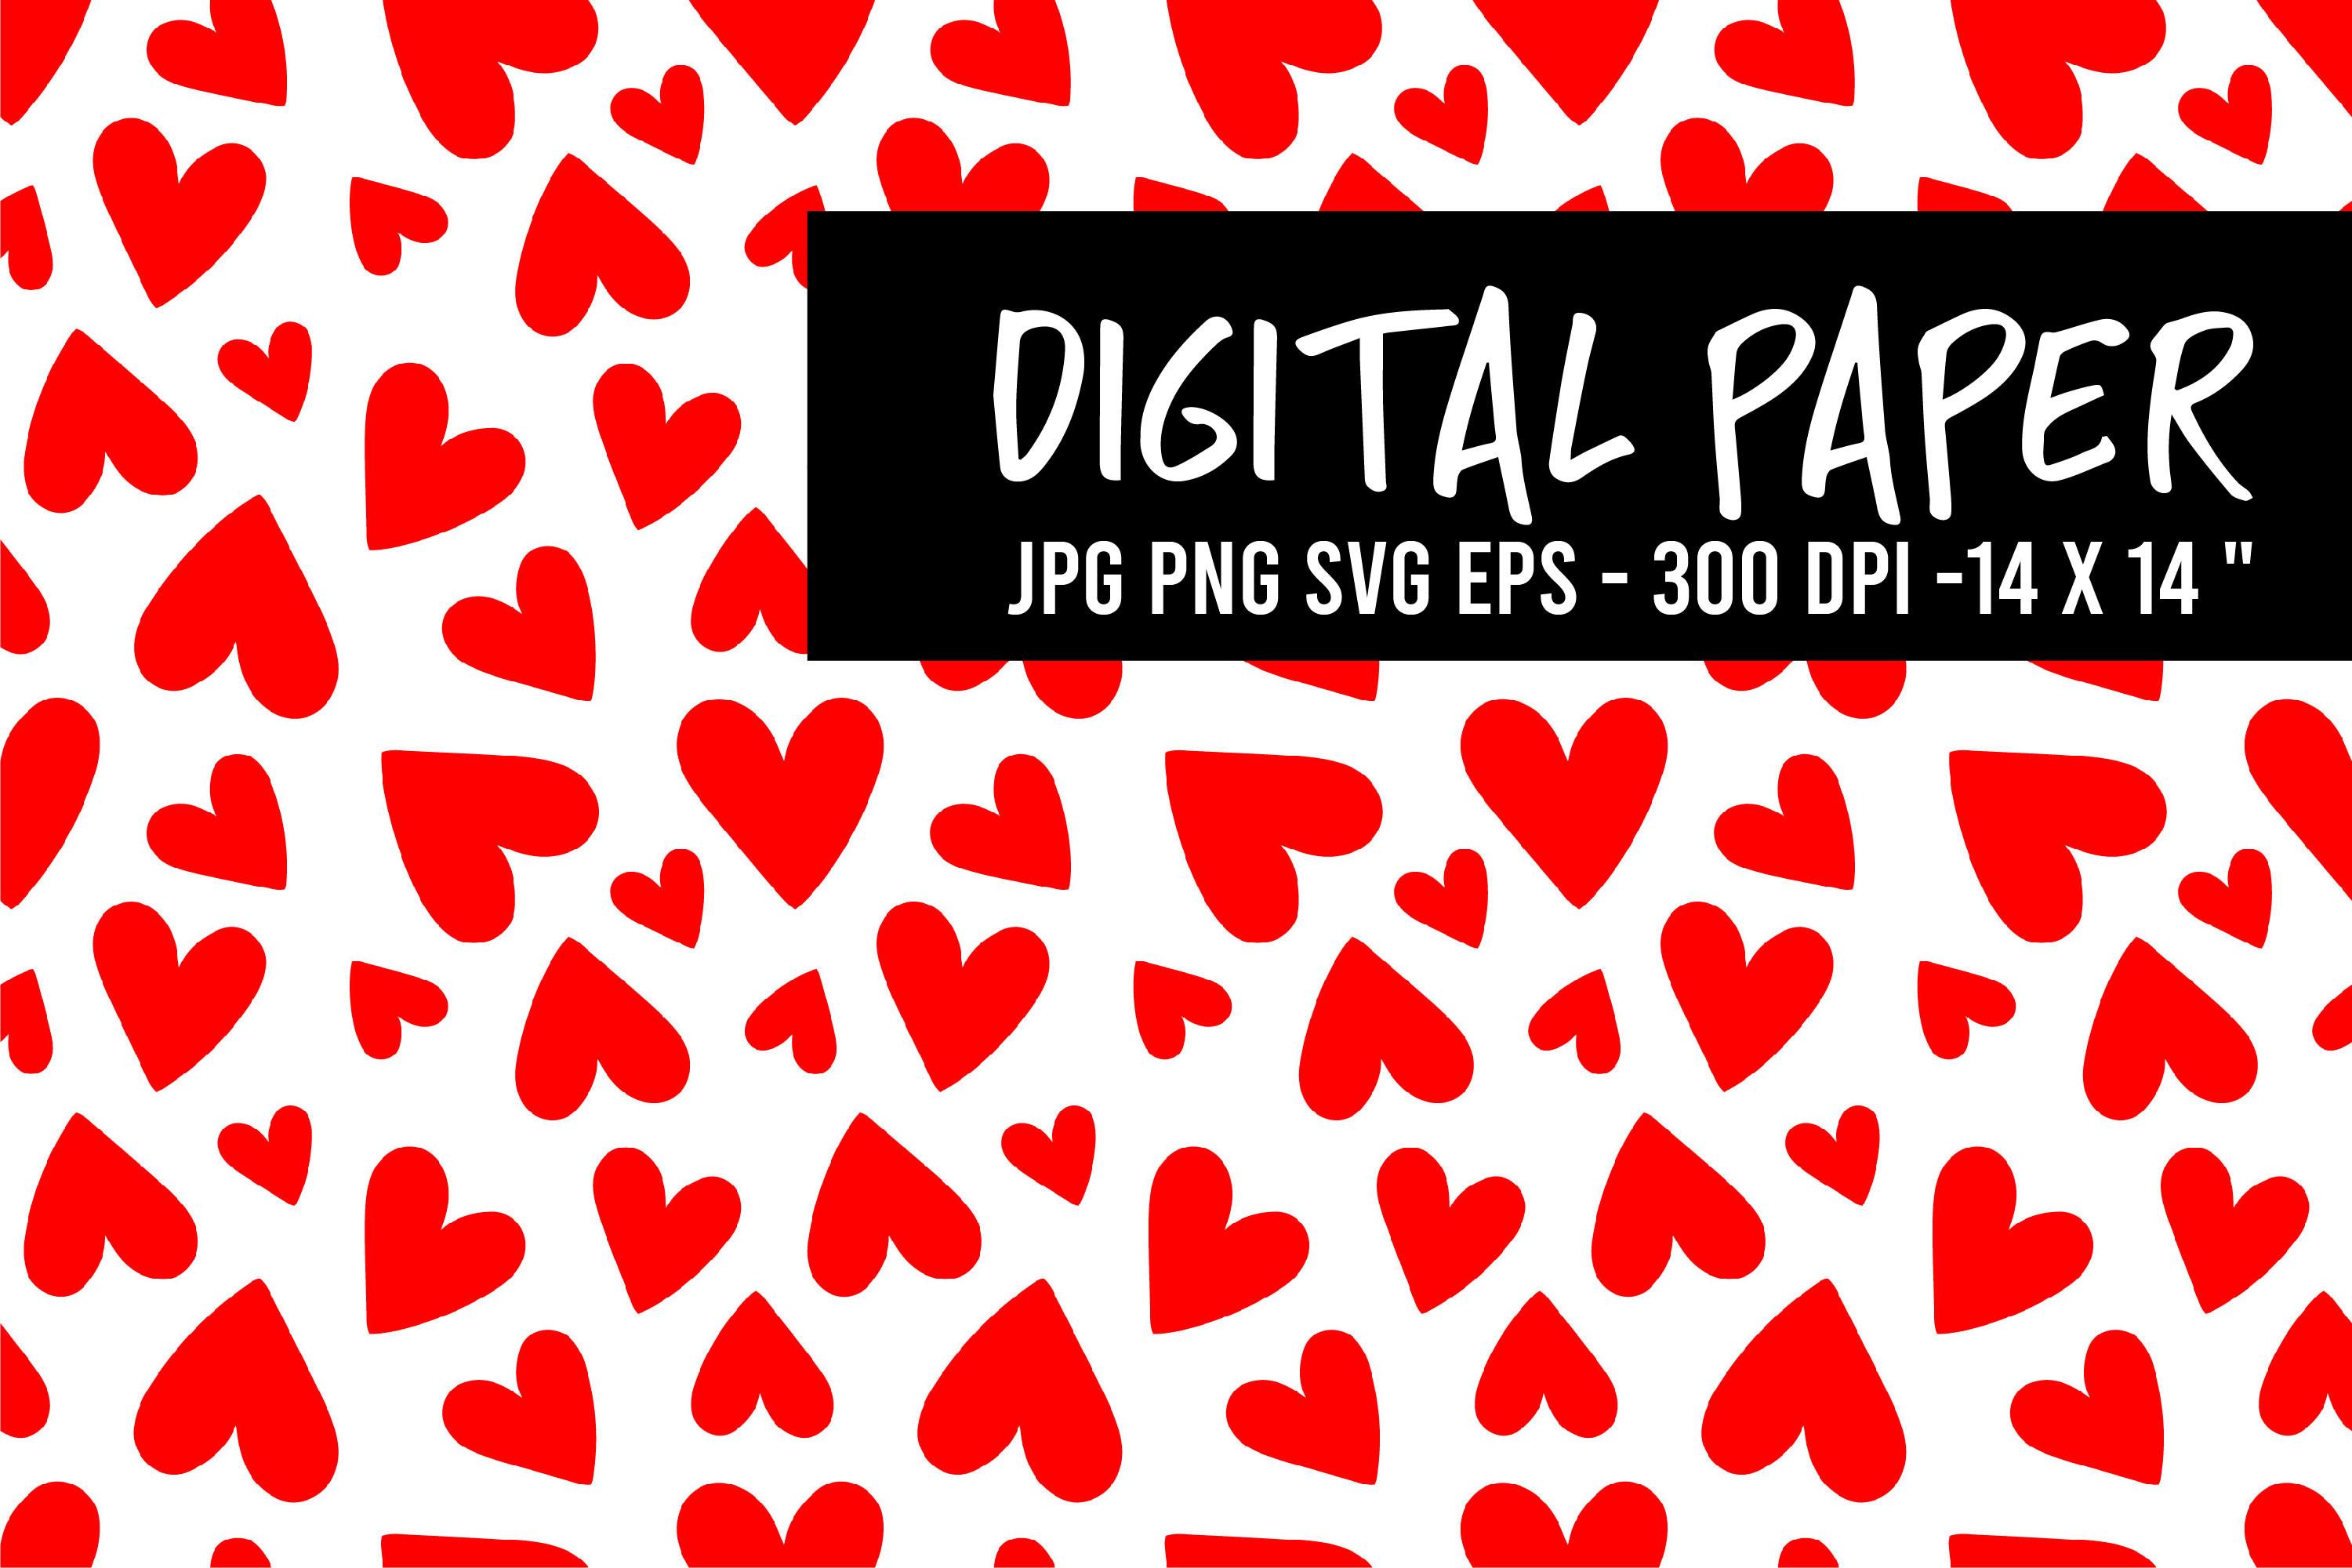 Digital Paper with Red Hearts